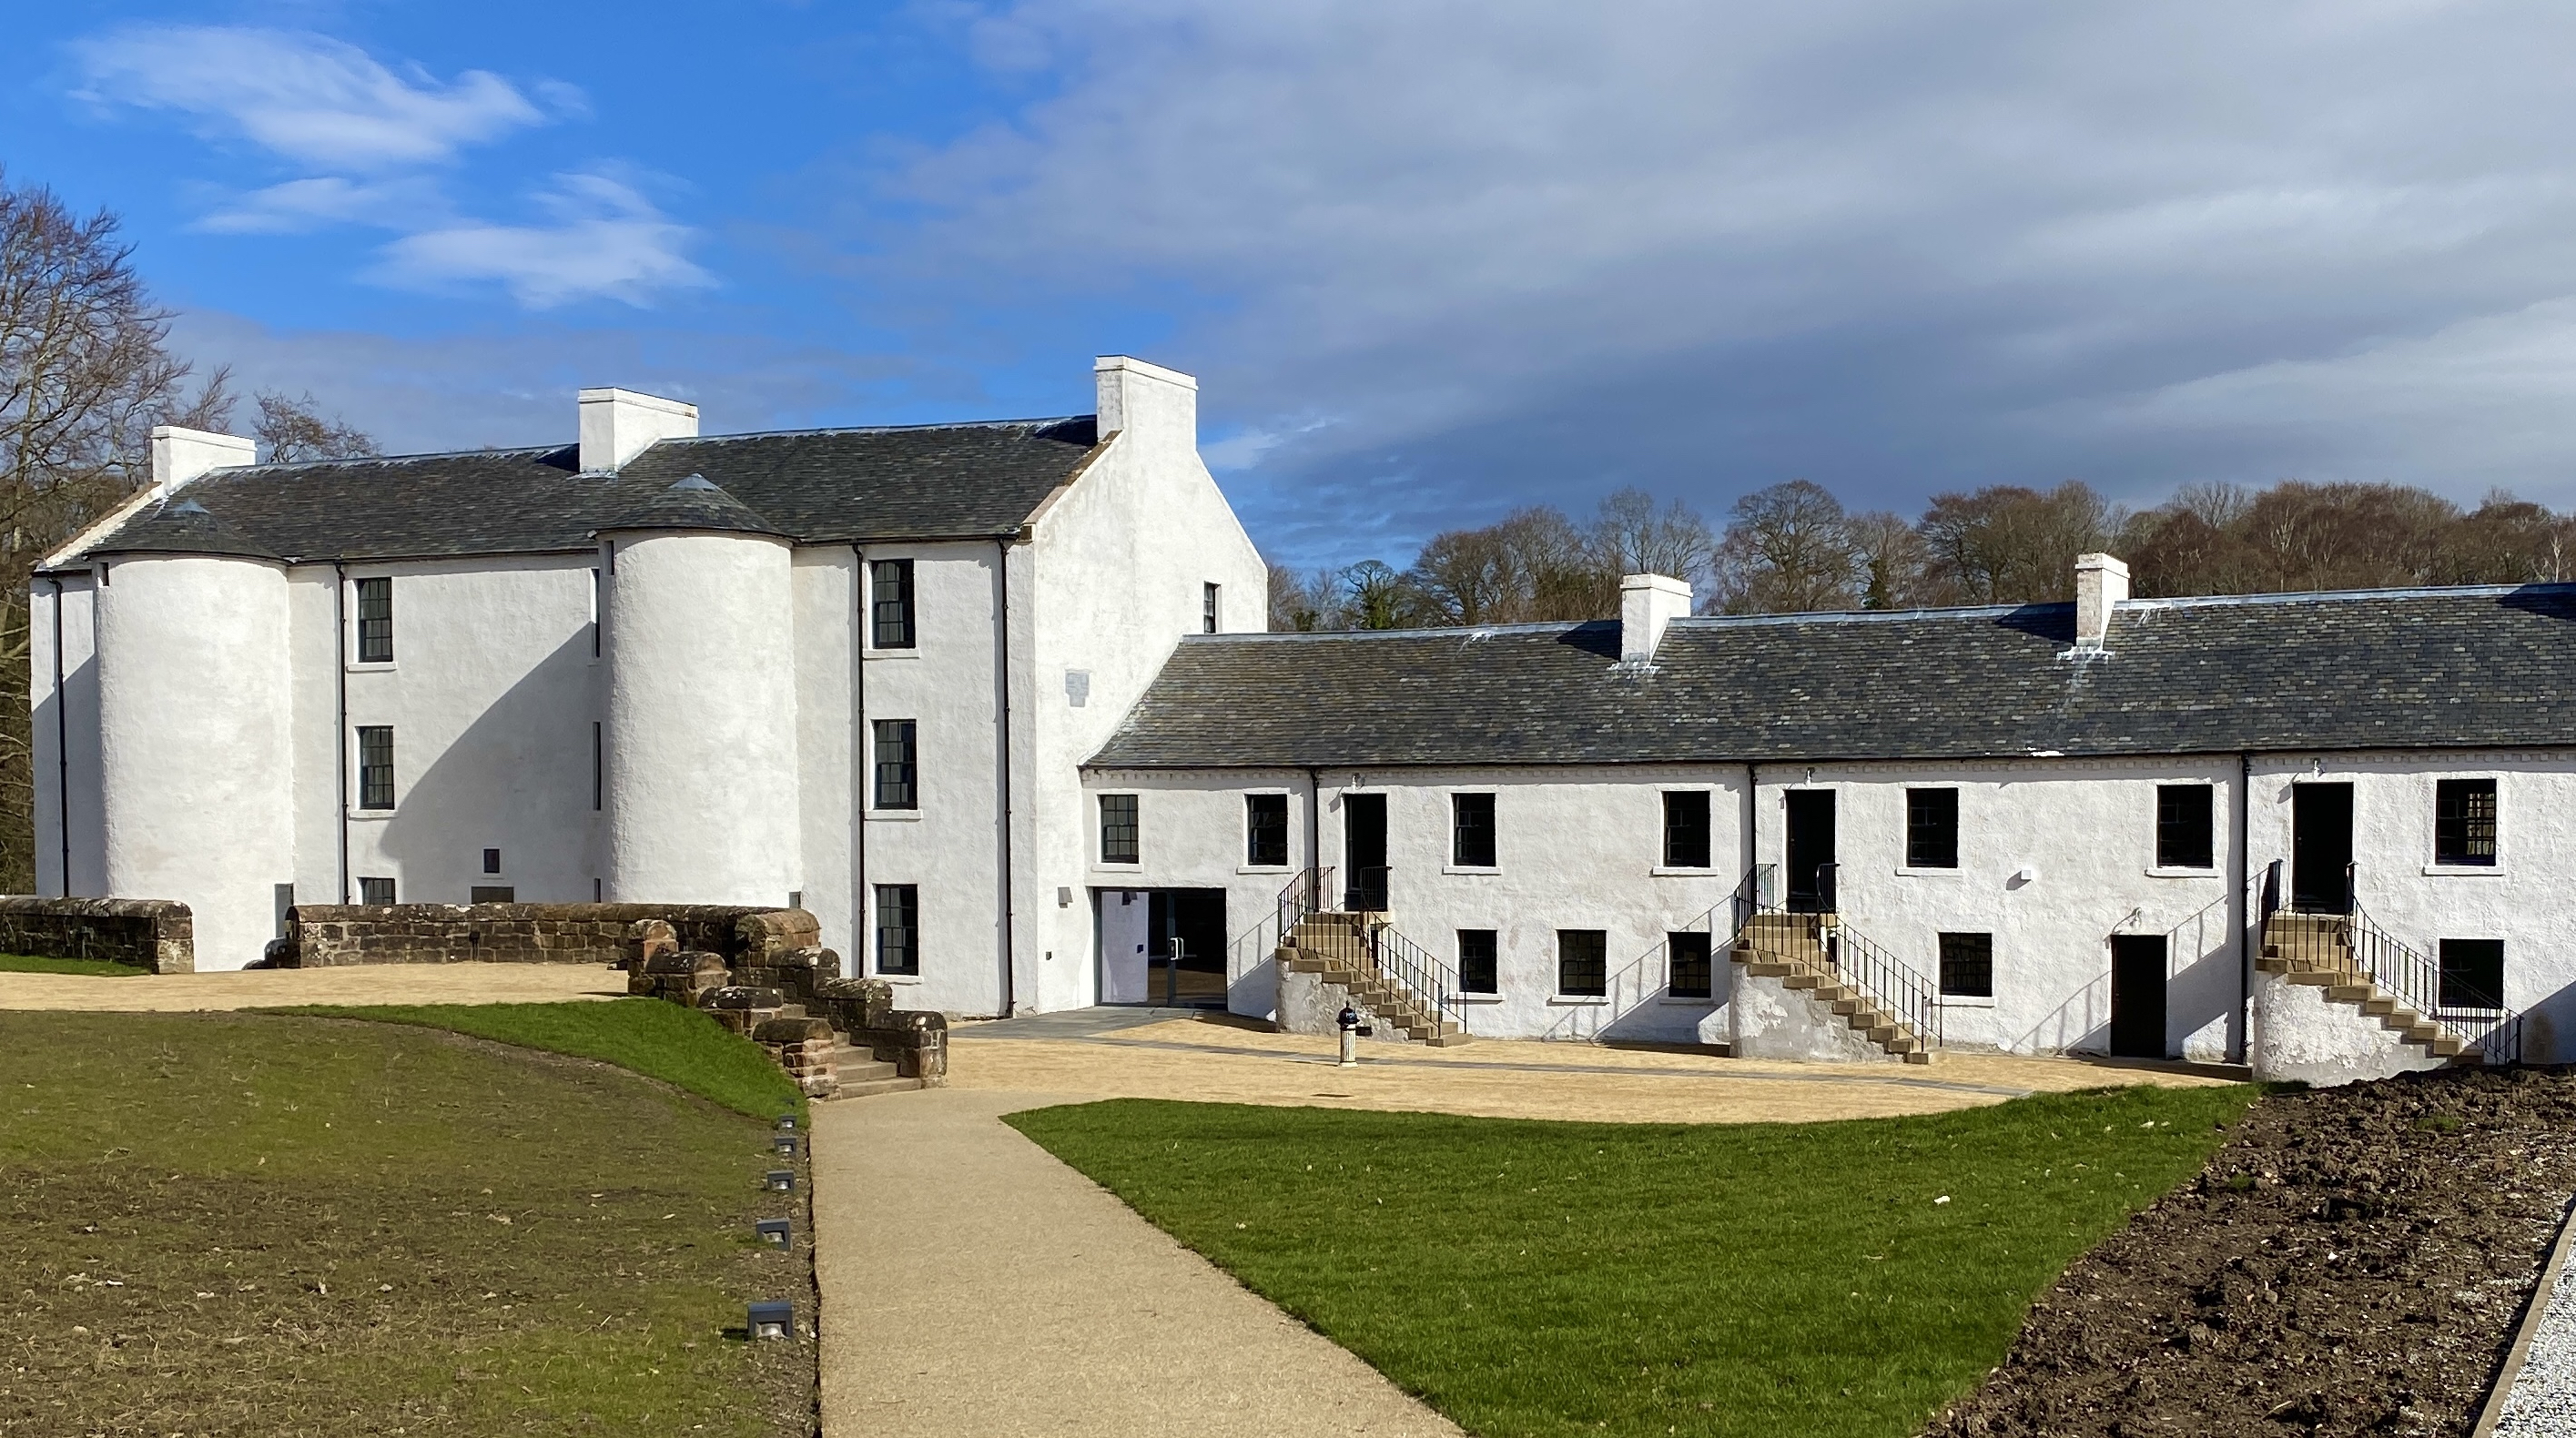 David Livingstone Birthplace reopens after £9.1m revamp